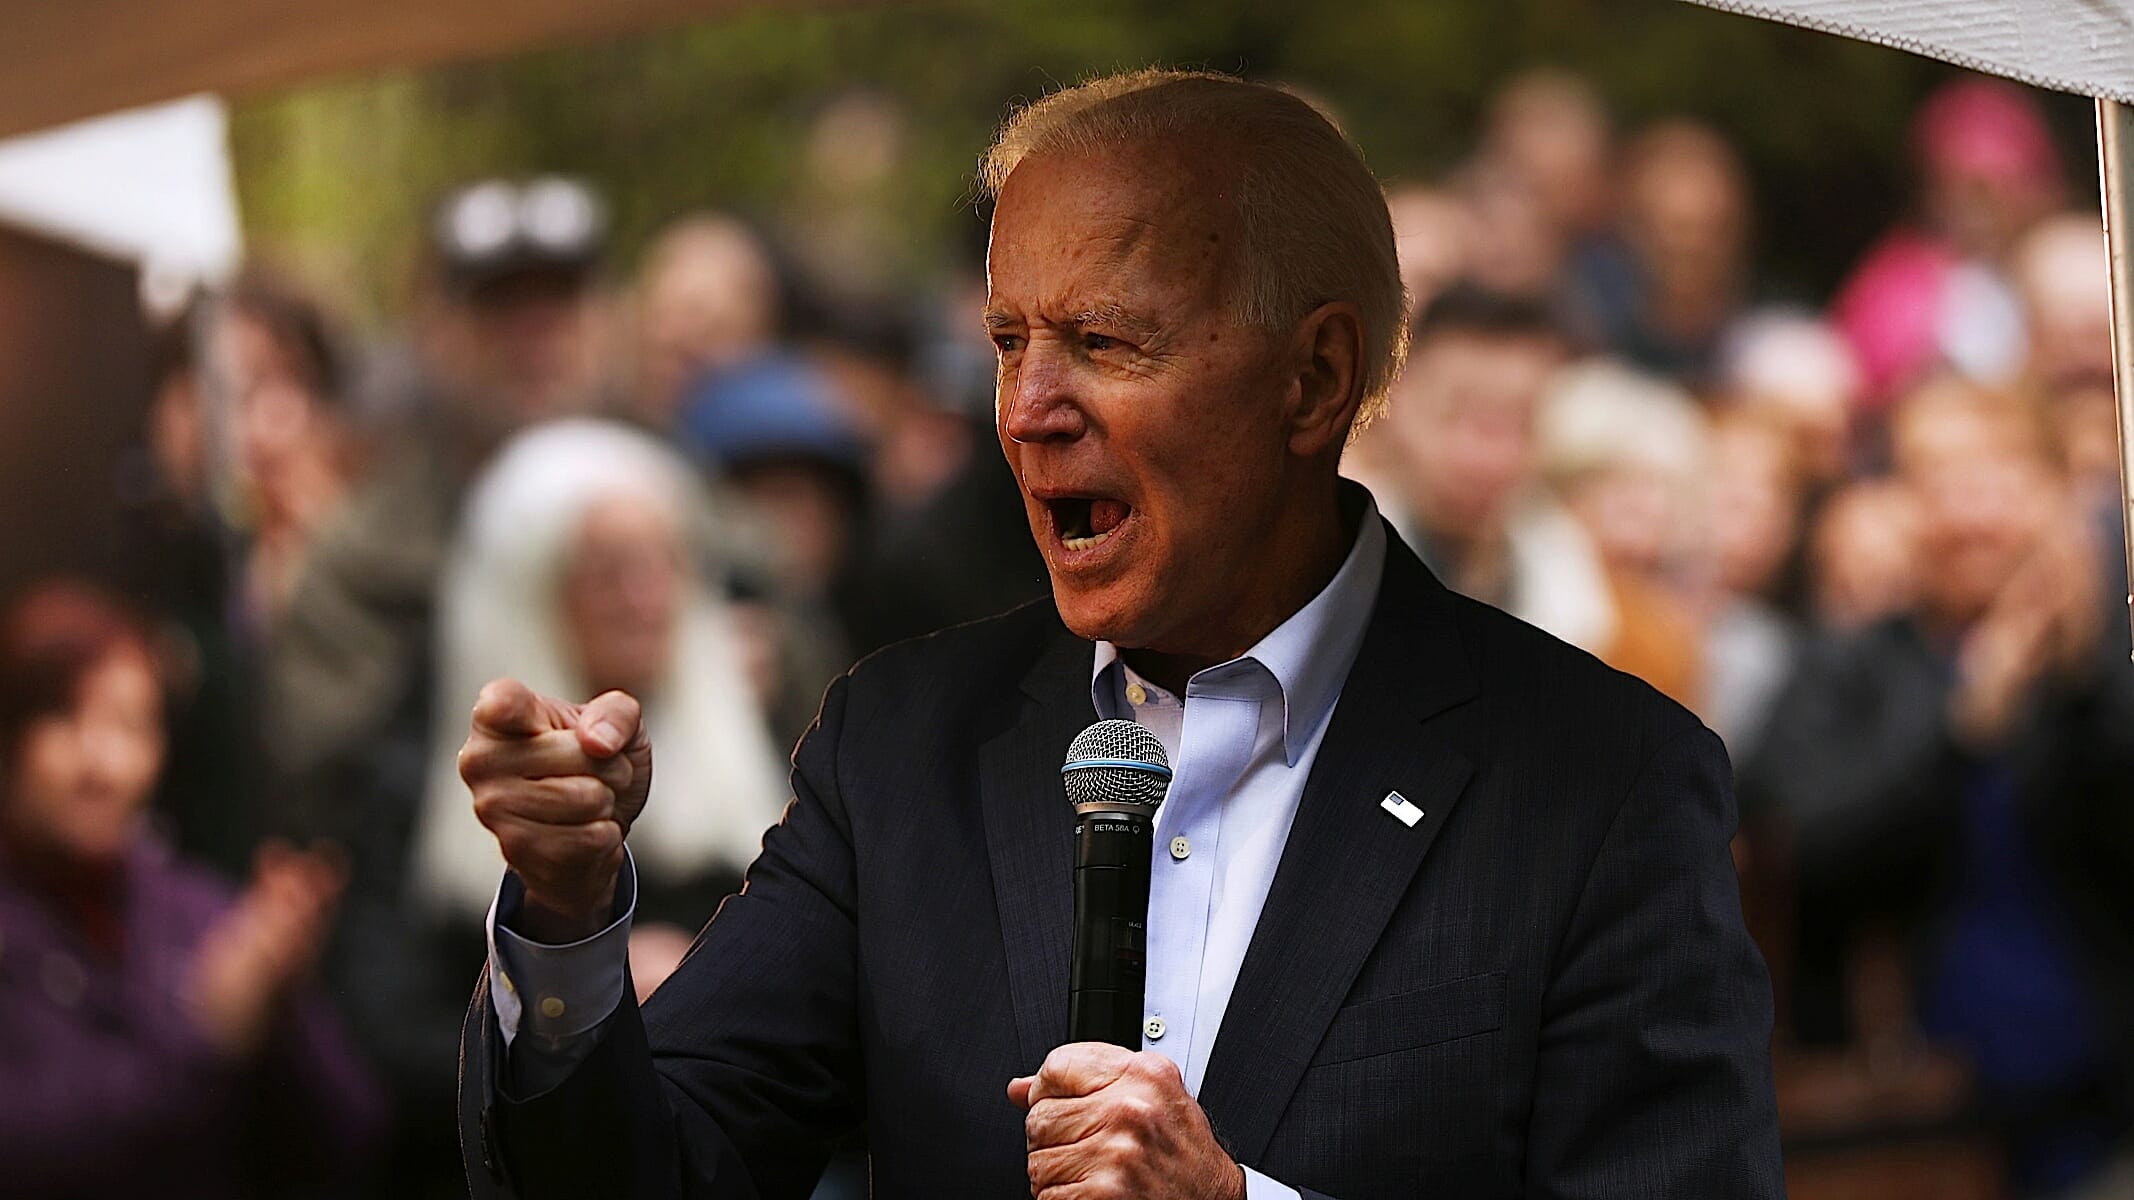 WATCH: Joe Biden Once Boasted About Wanting to Cut Social Security, Medicare, Medicaid, and Veterans’ Benefits